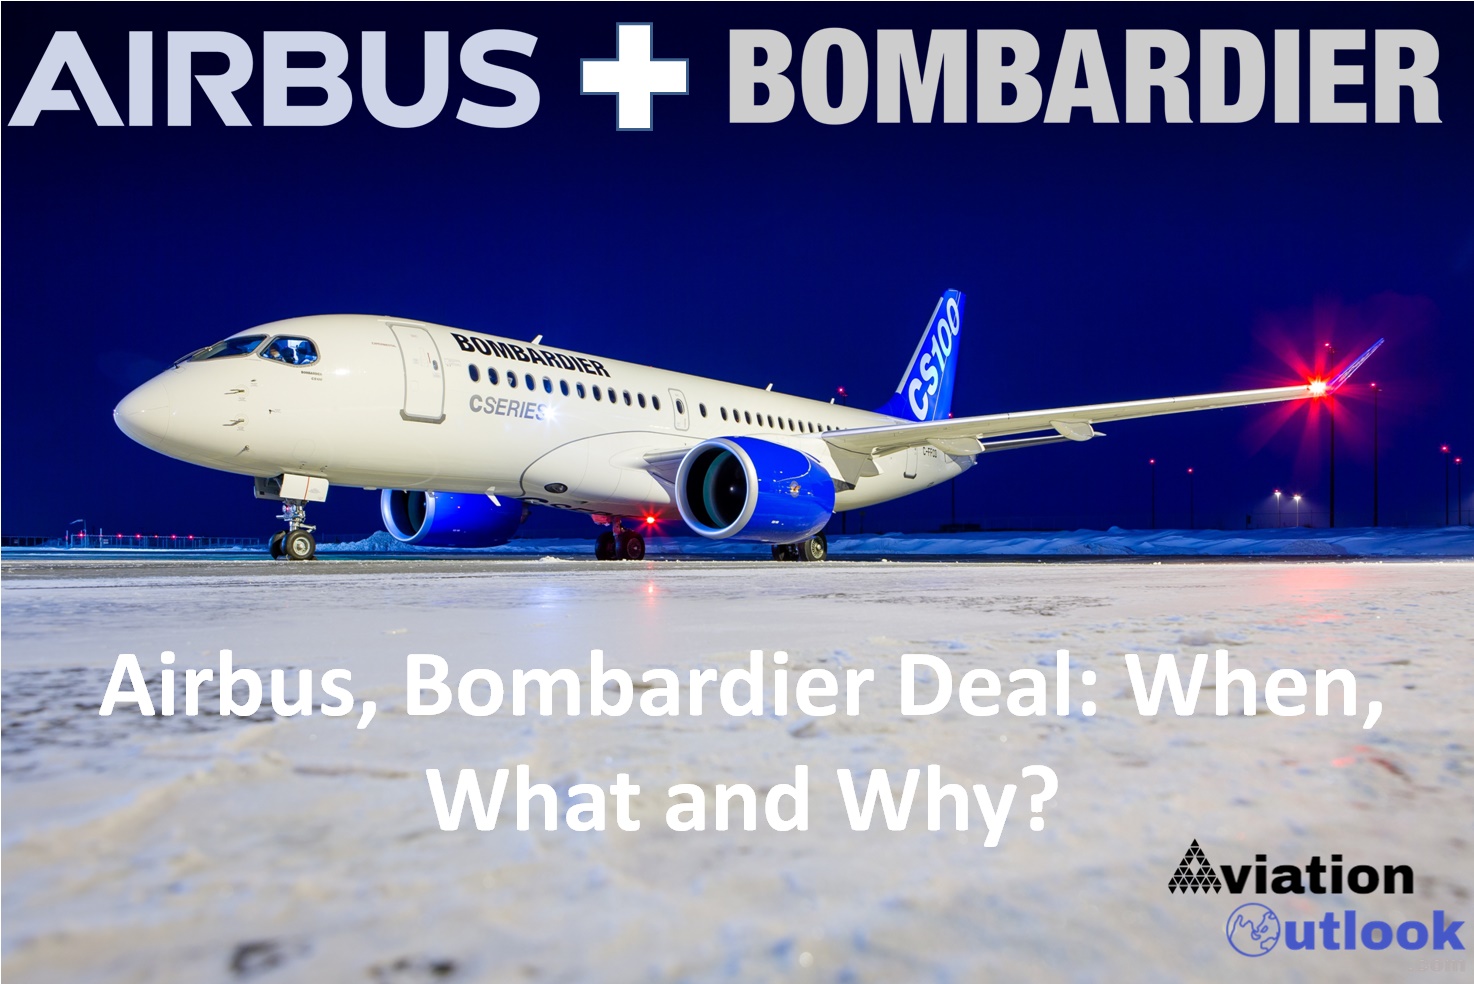 Airbus Bombardier Deal